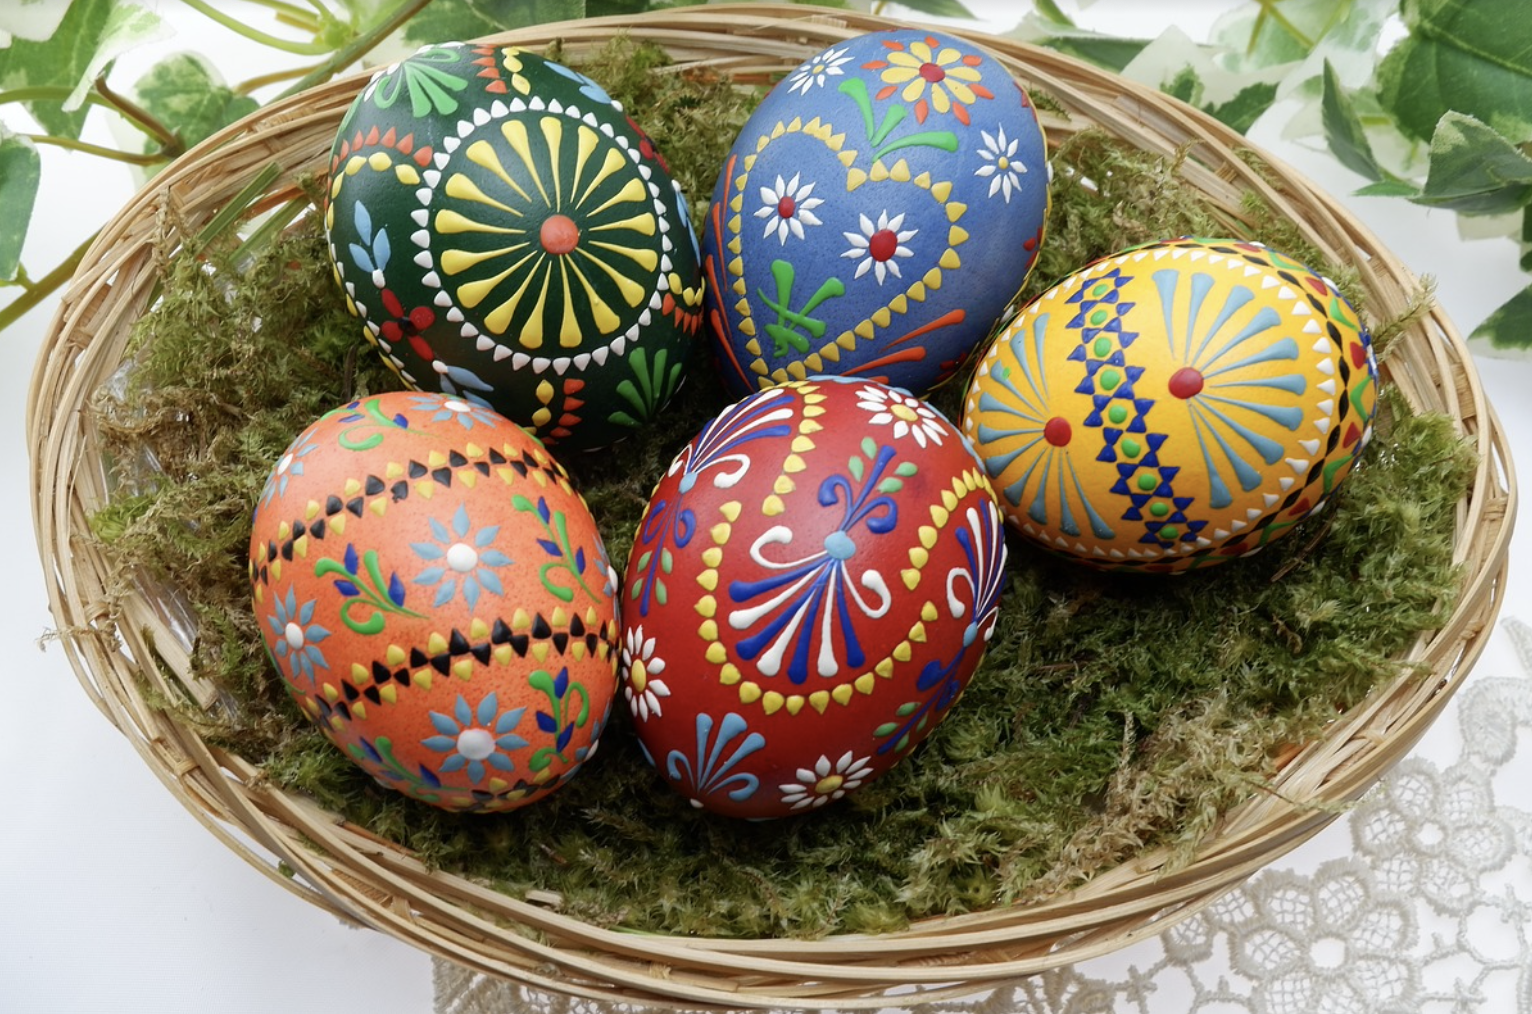 Colored or painted Easter eggs are a tradition around the world